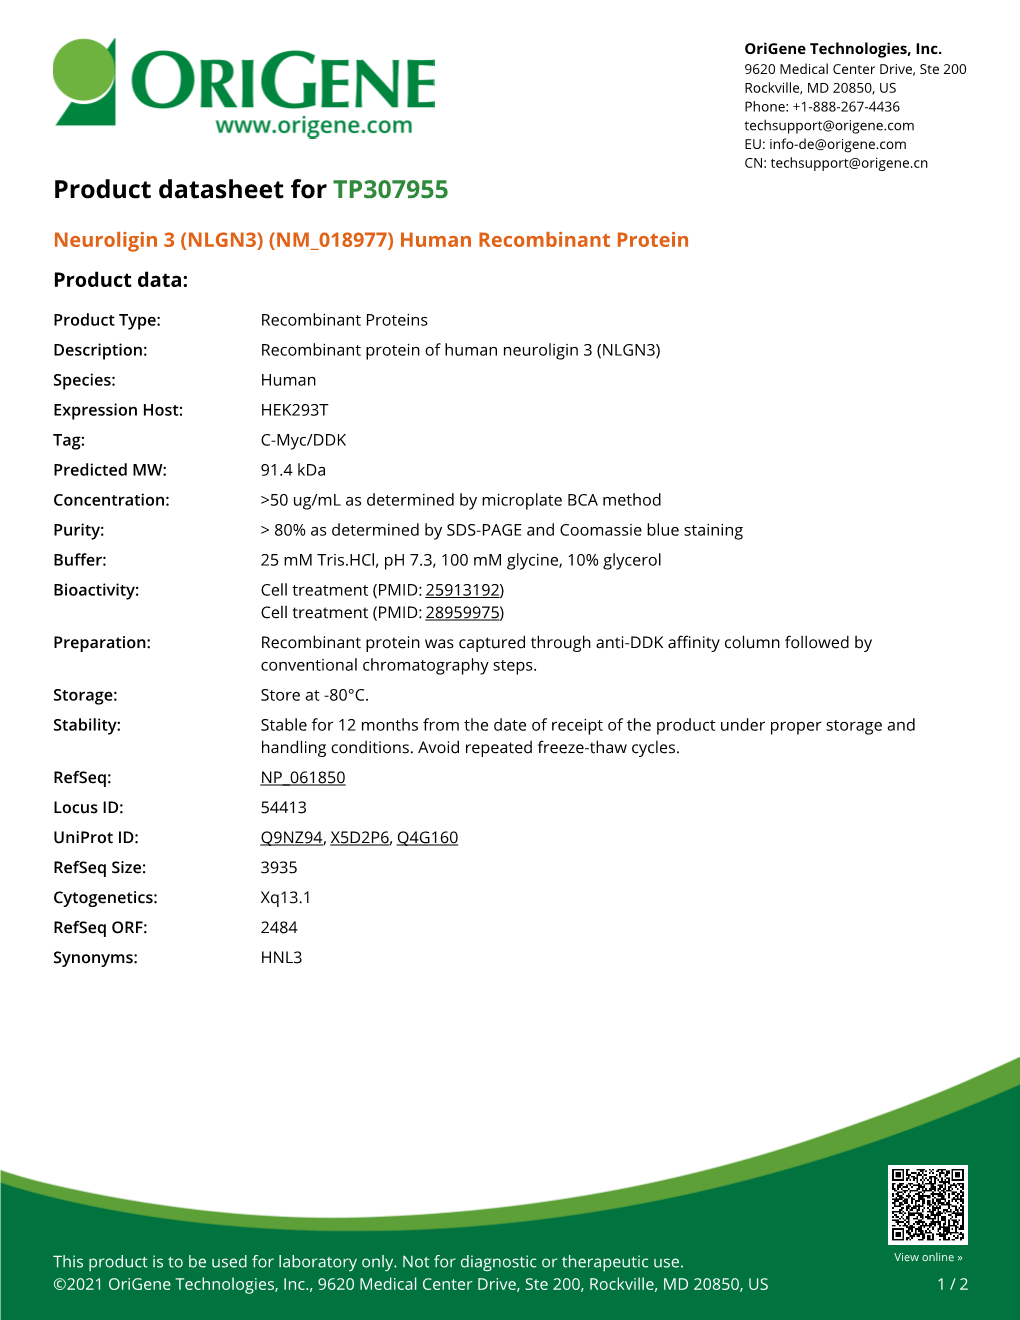 (NLGN3) (NM 018977) Human Recombinant Protein Product Data